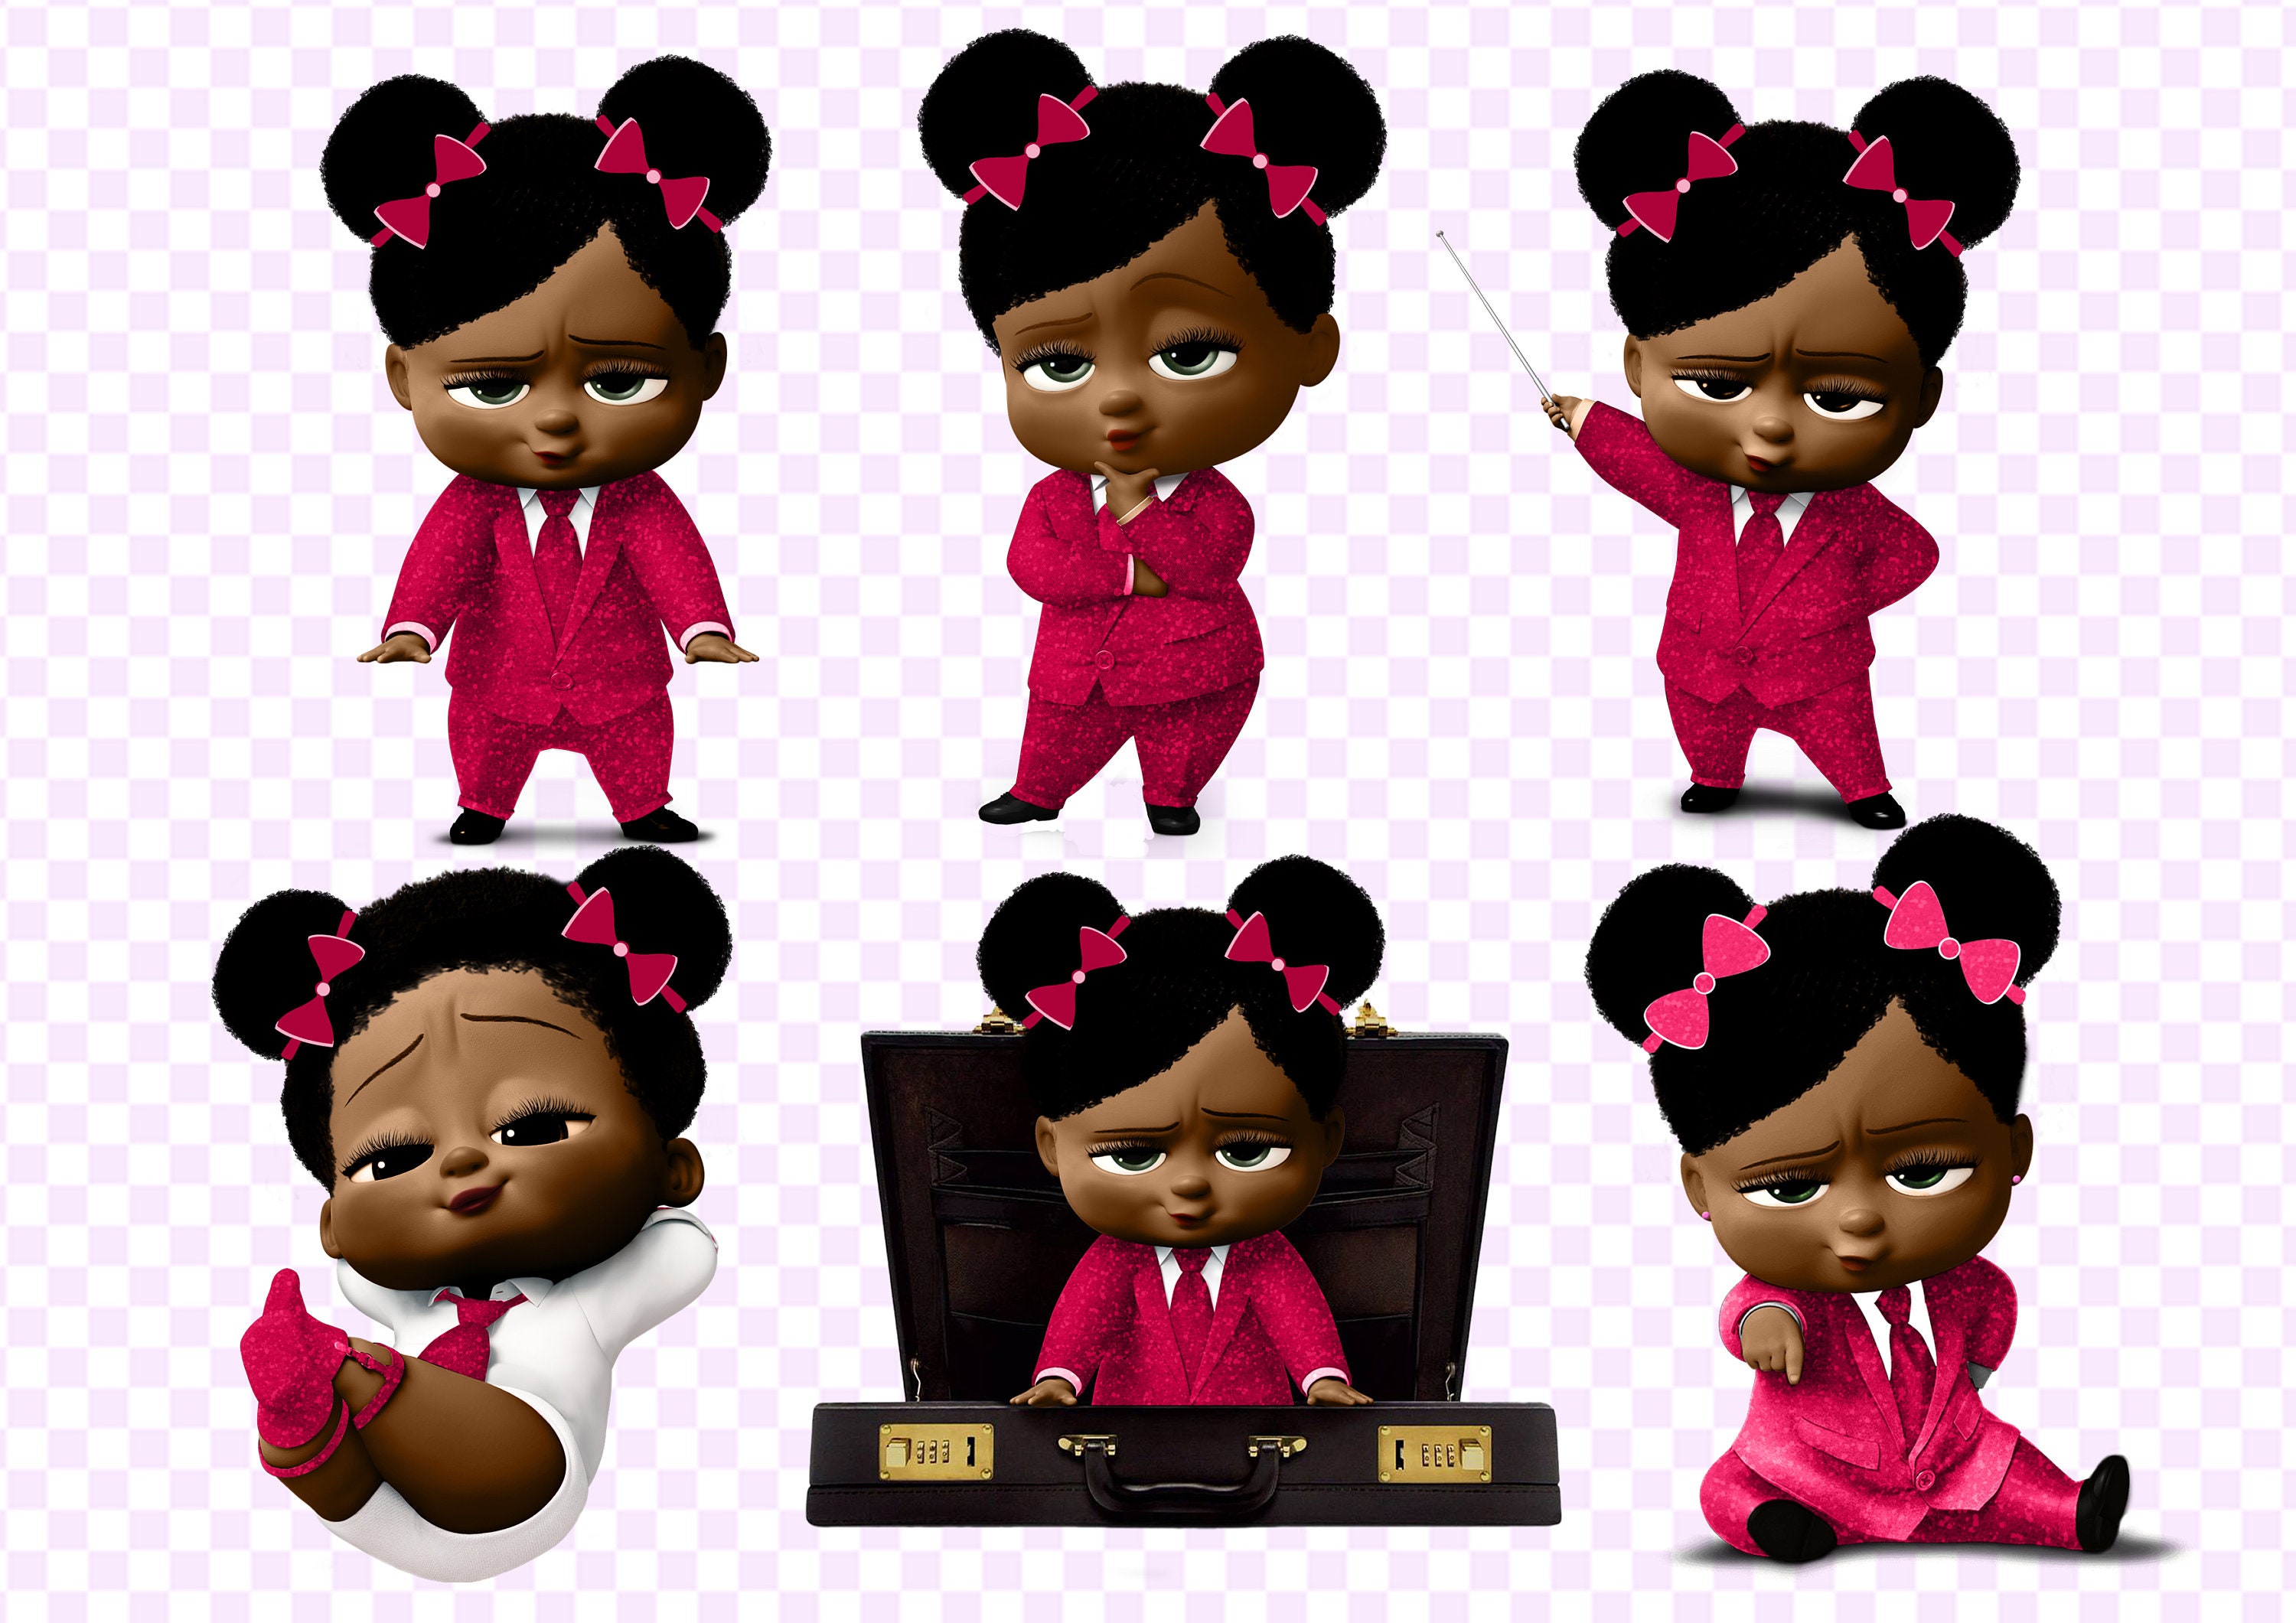 Download African American Boss Baby Girl clipart 300 dpi 9 PNG ...